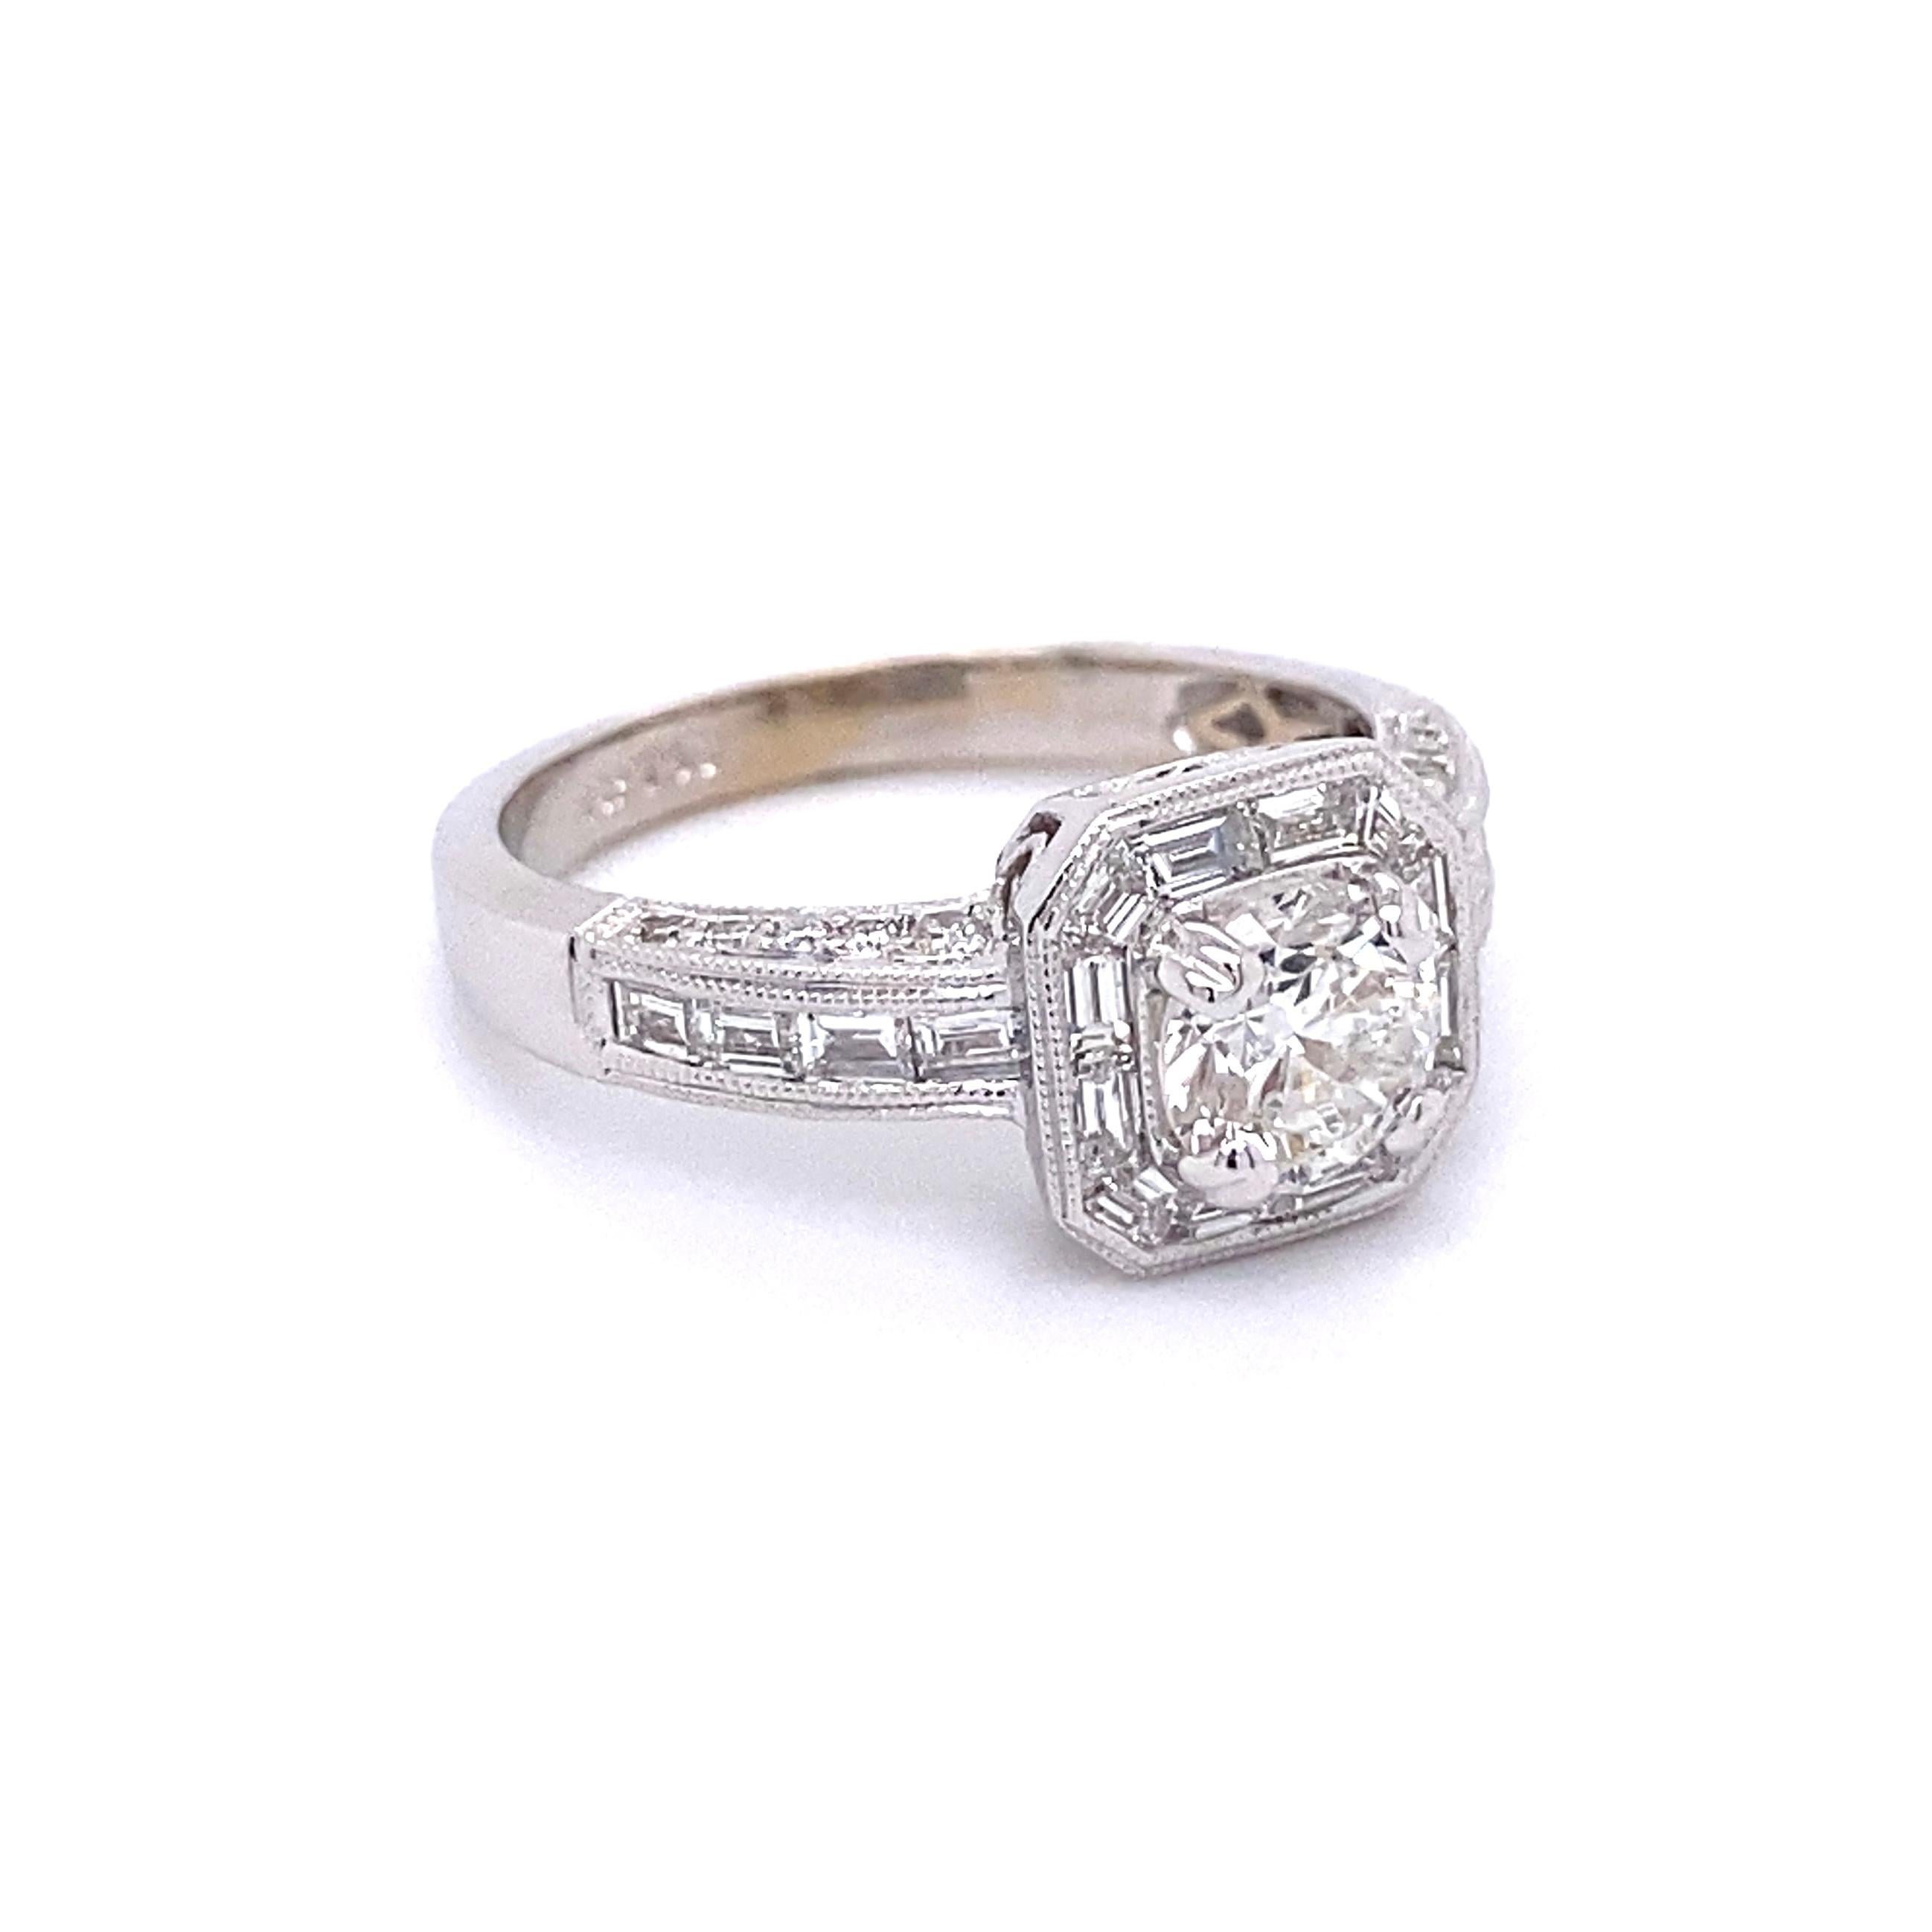 Diamond GIA Solitaire Art Deco Gold Ring Estate Fine Jewelry Simply Beautiful! Finely detailed Diamond Solitaire 18K White Gold Ring. Centering a securely nestled GIA Round Brilliant-cut Diamond, weighing approx. 0.83 Carat, F-I1; GIA certificate